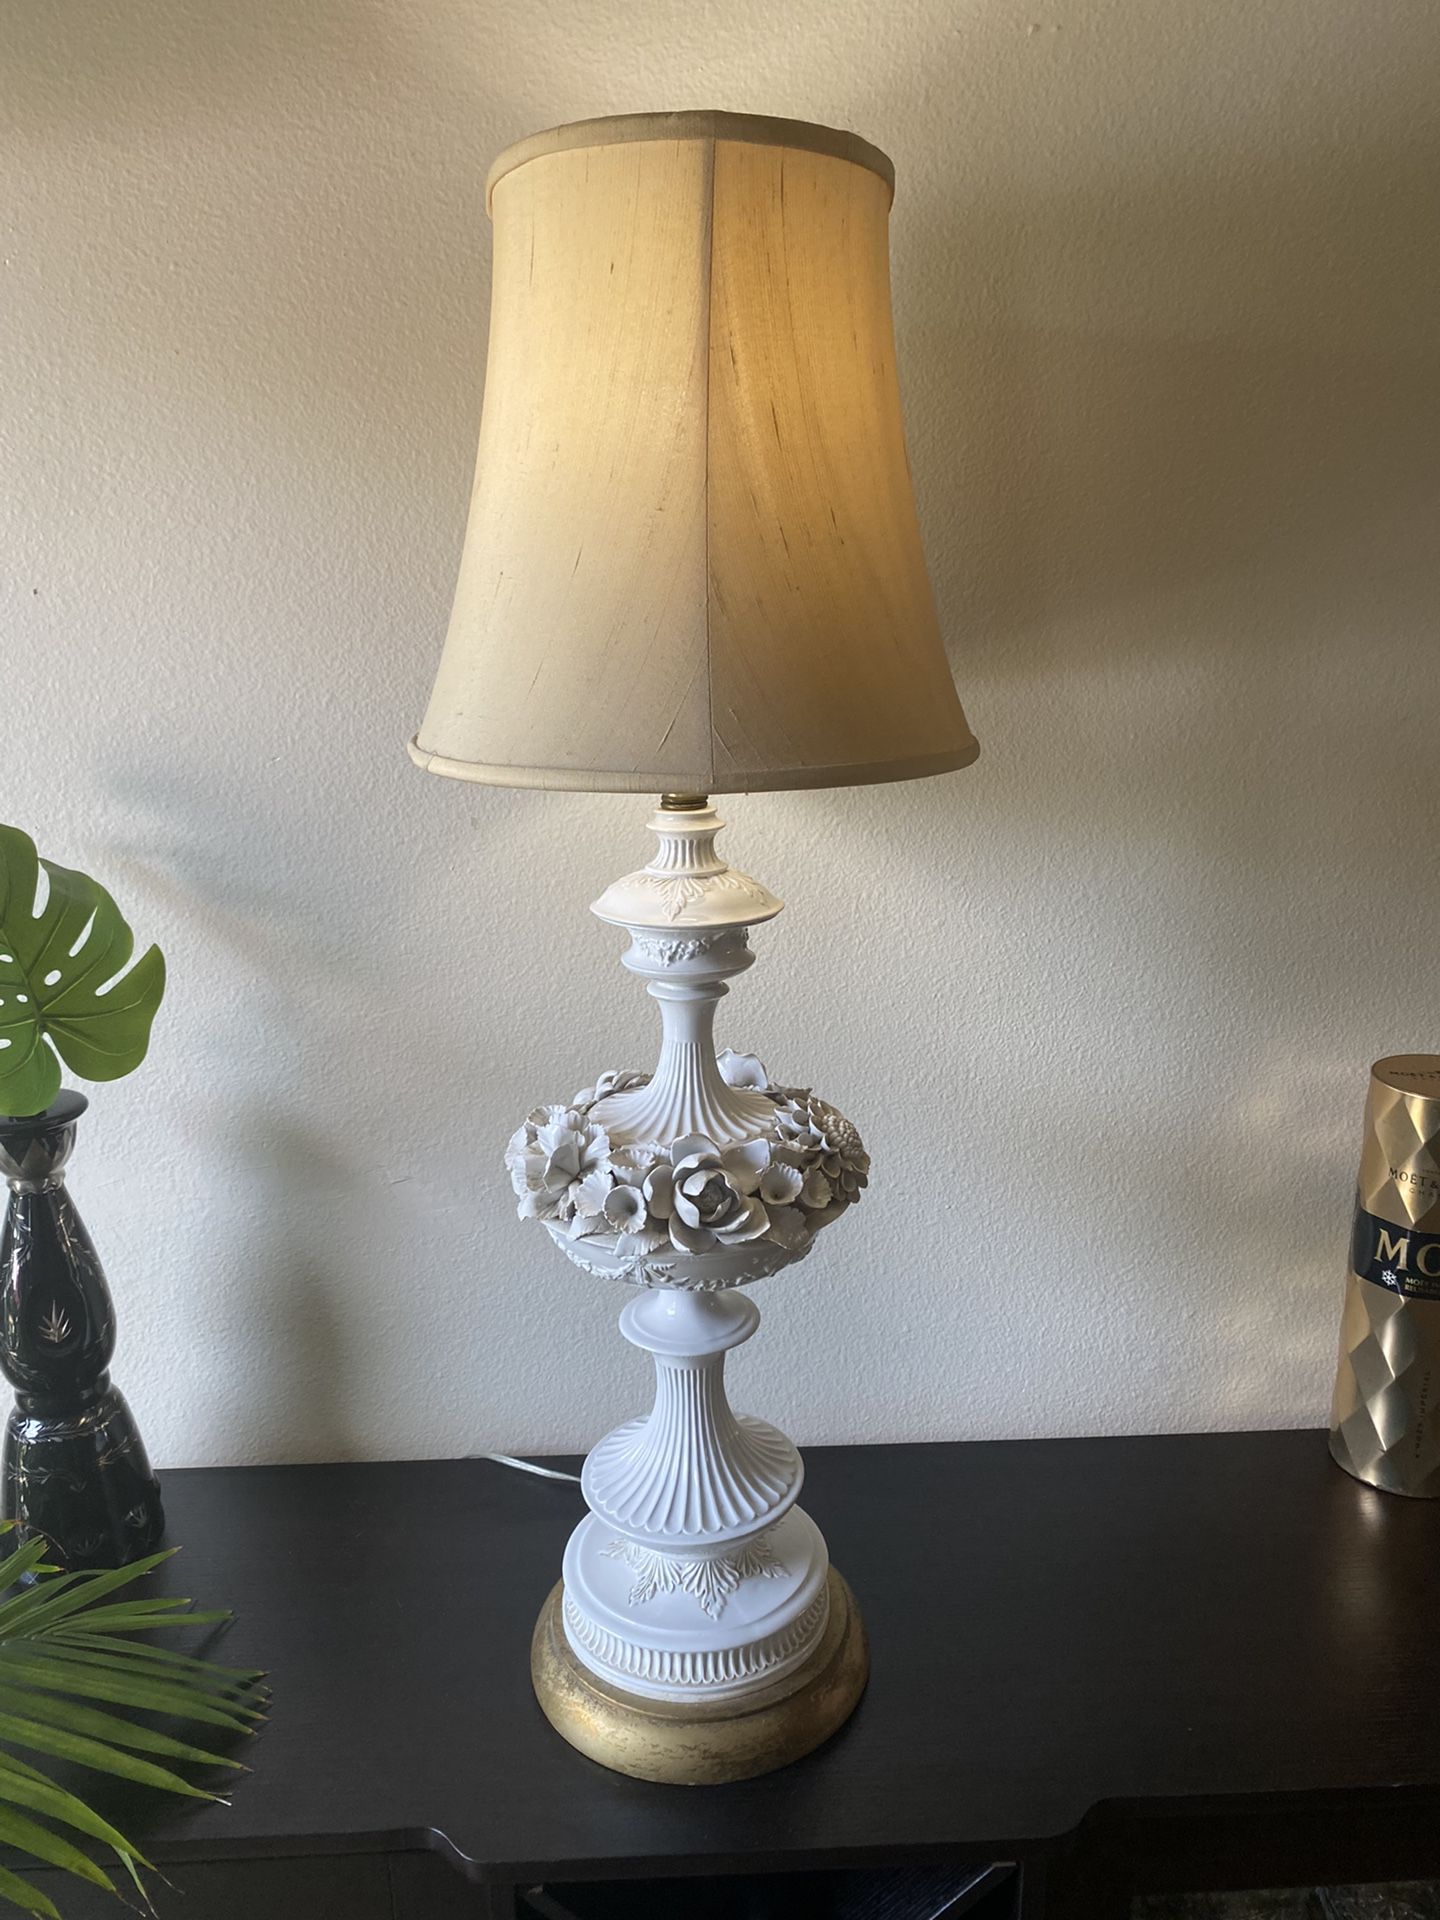 Vintage Victorian Lamp Light Fixture, White w/ Beige Lamp Shade, Floral Aesthetic